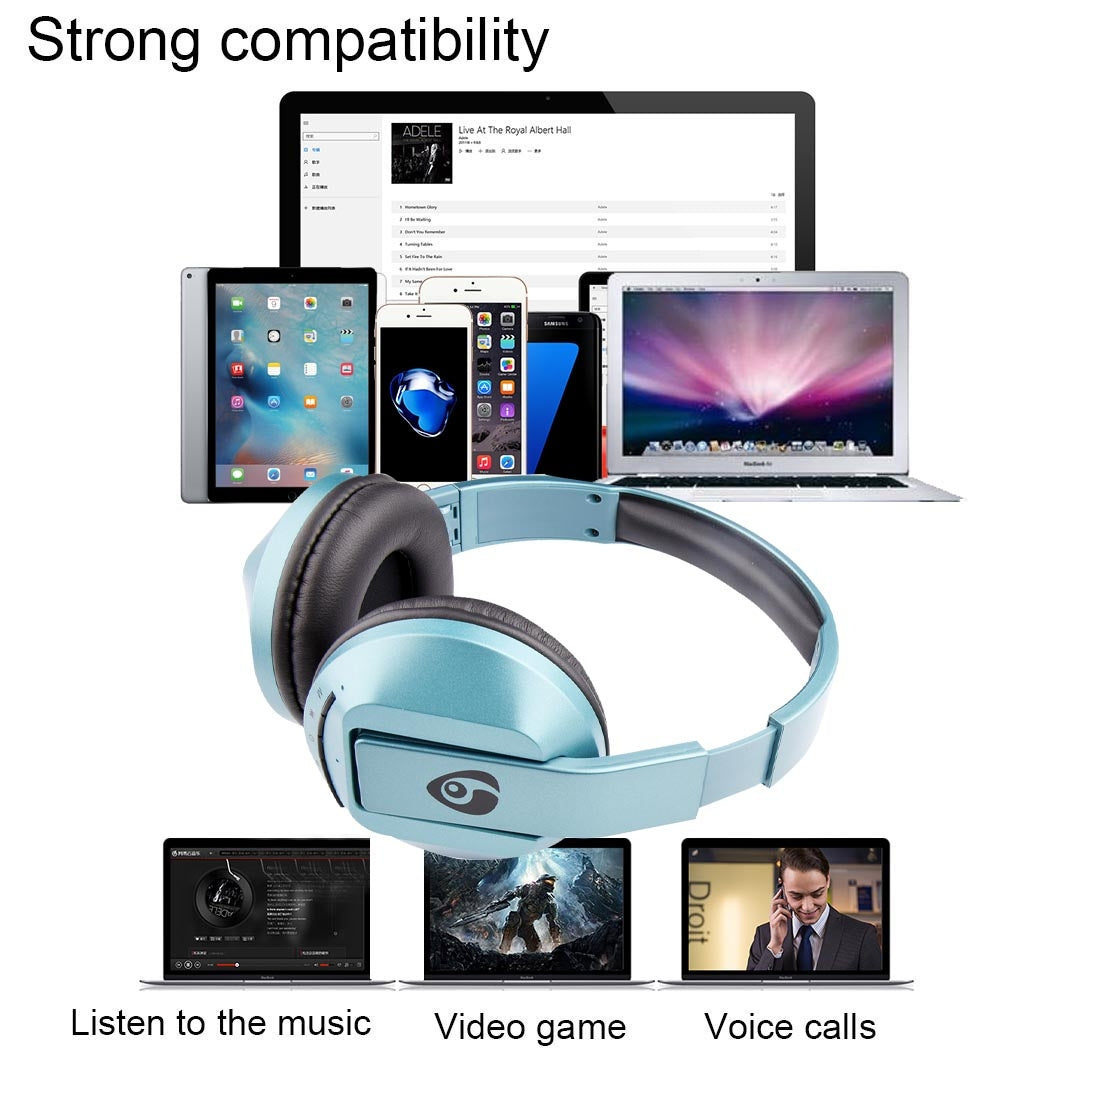 OVLENG S77 Headband Universal Folding Bluetooth Headset with Handsfree Call Function, for iPhone / Samsung / LG / HTC / Nokia / Blackberry Mobile Phone(Blue)